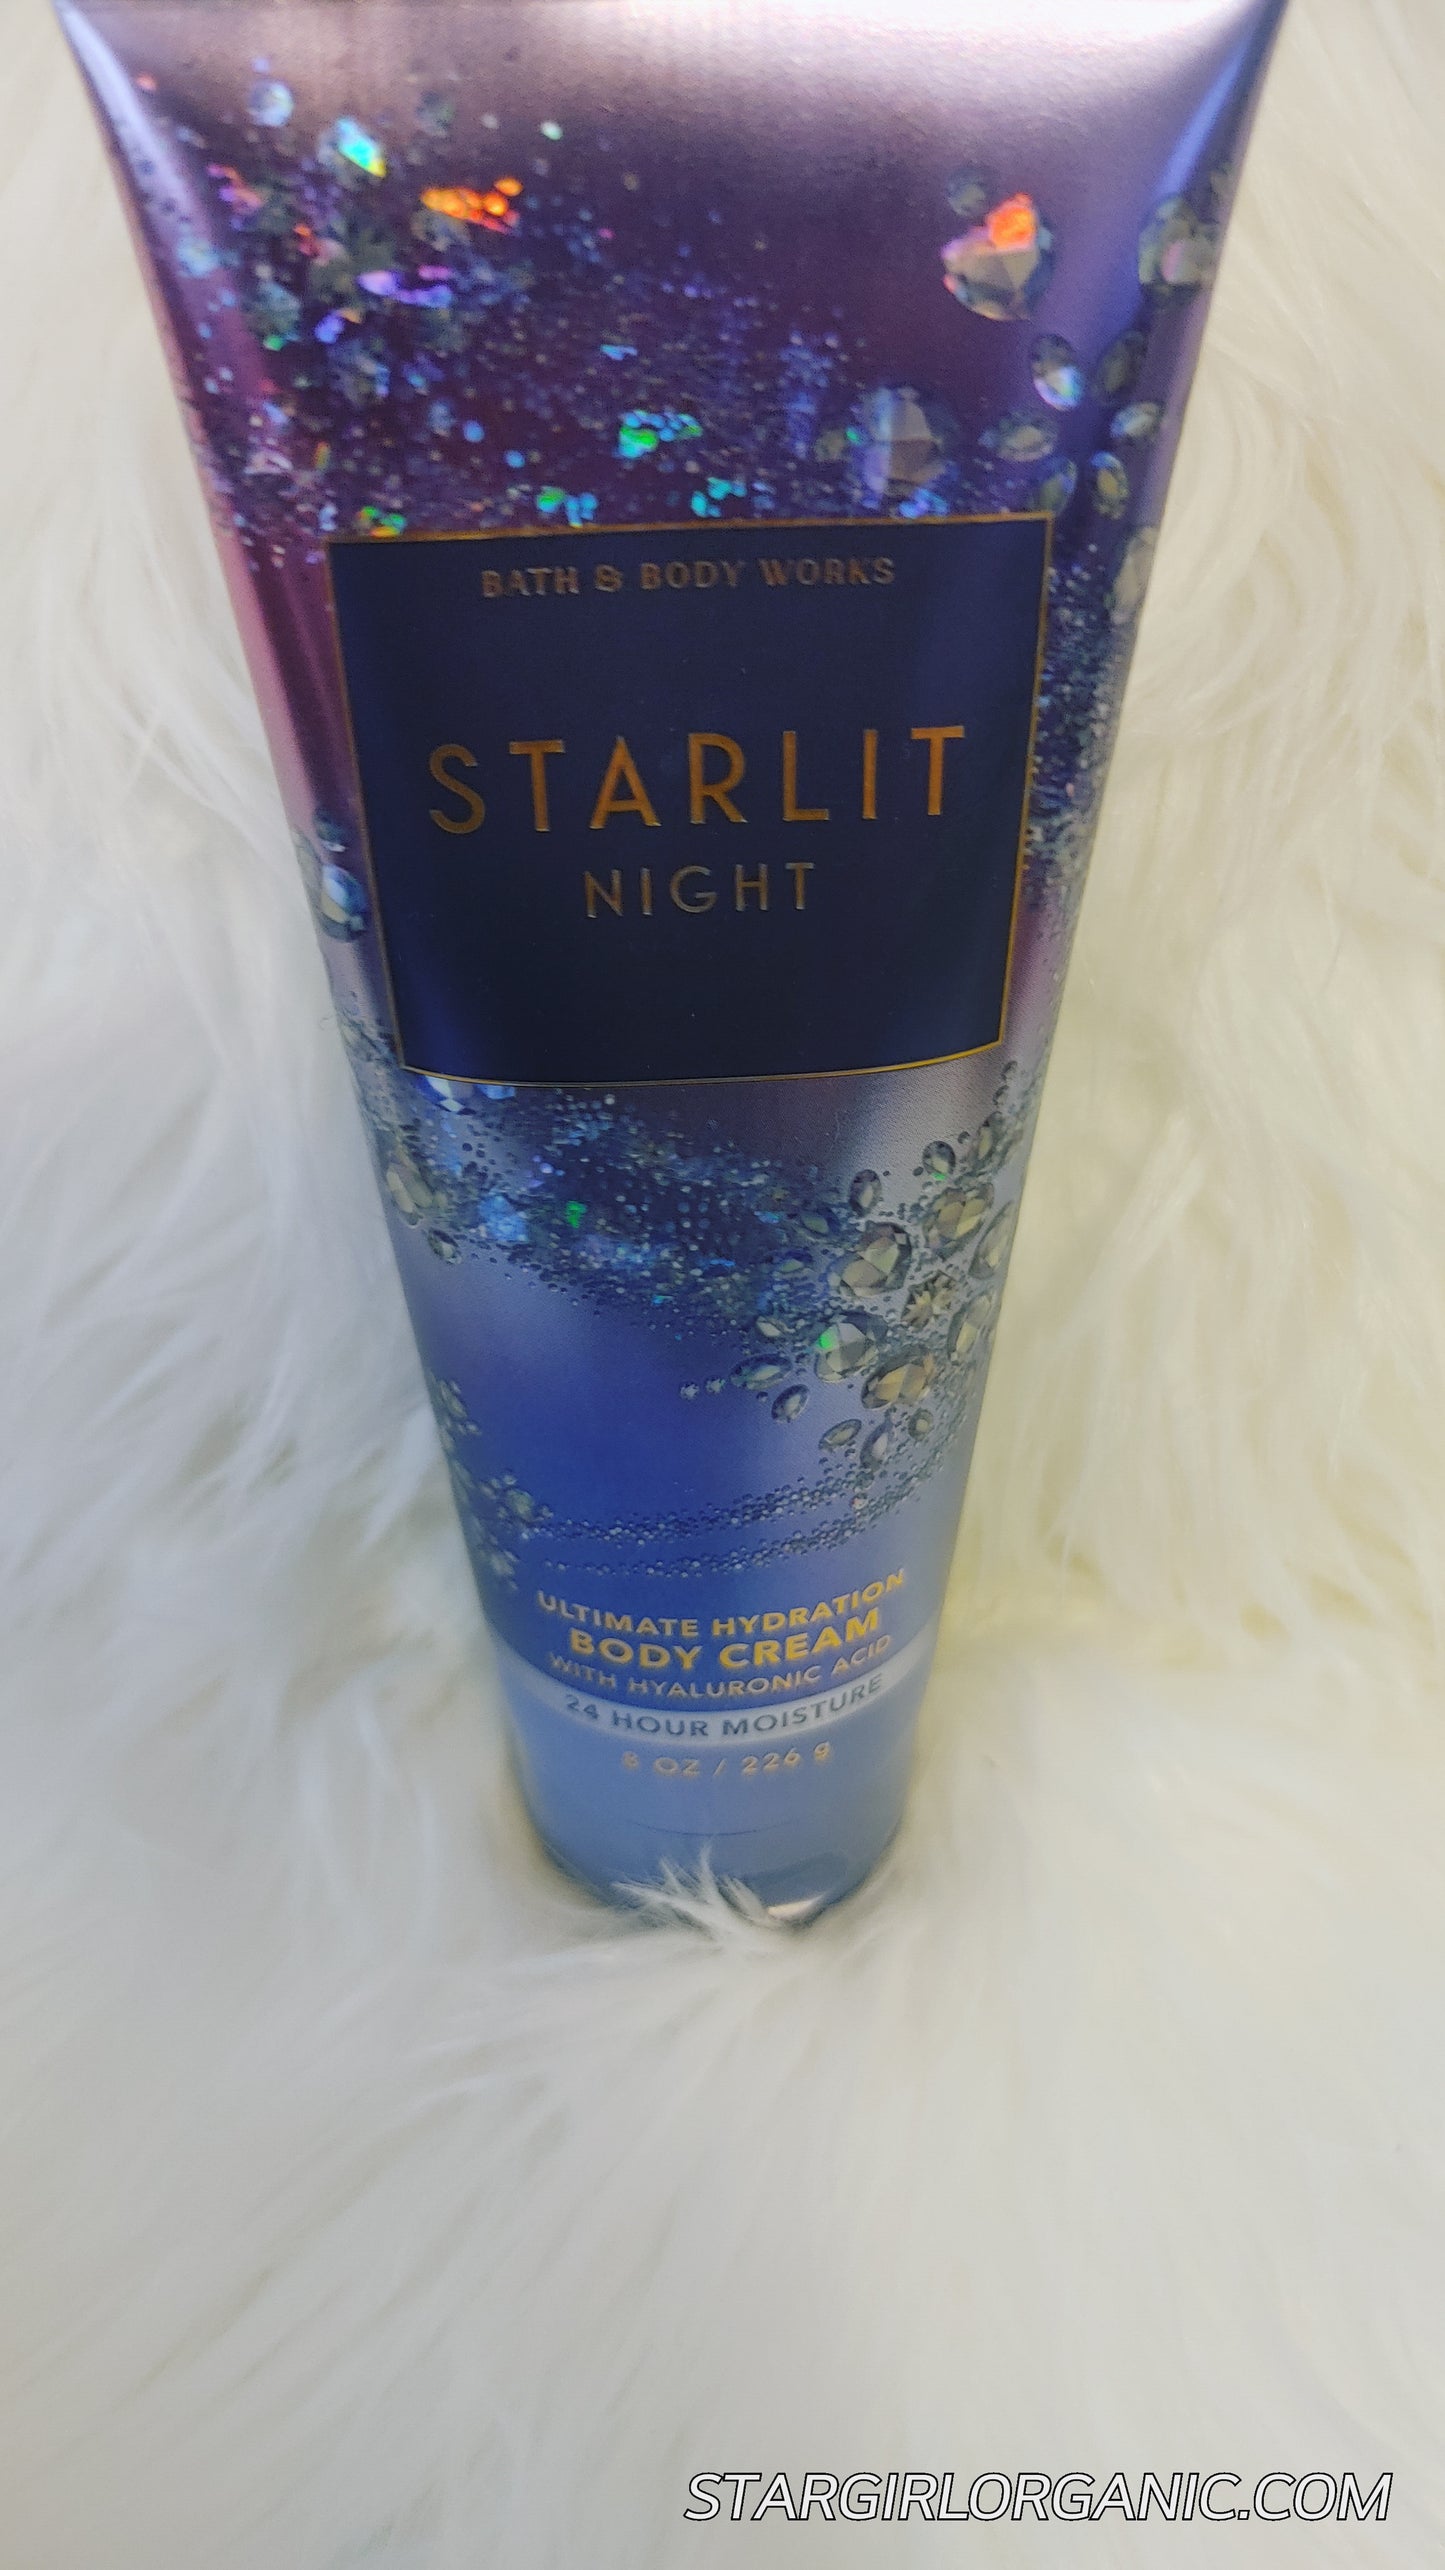 Bath & Body Works Starlit Night Signature Collection Body Lotion